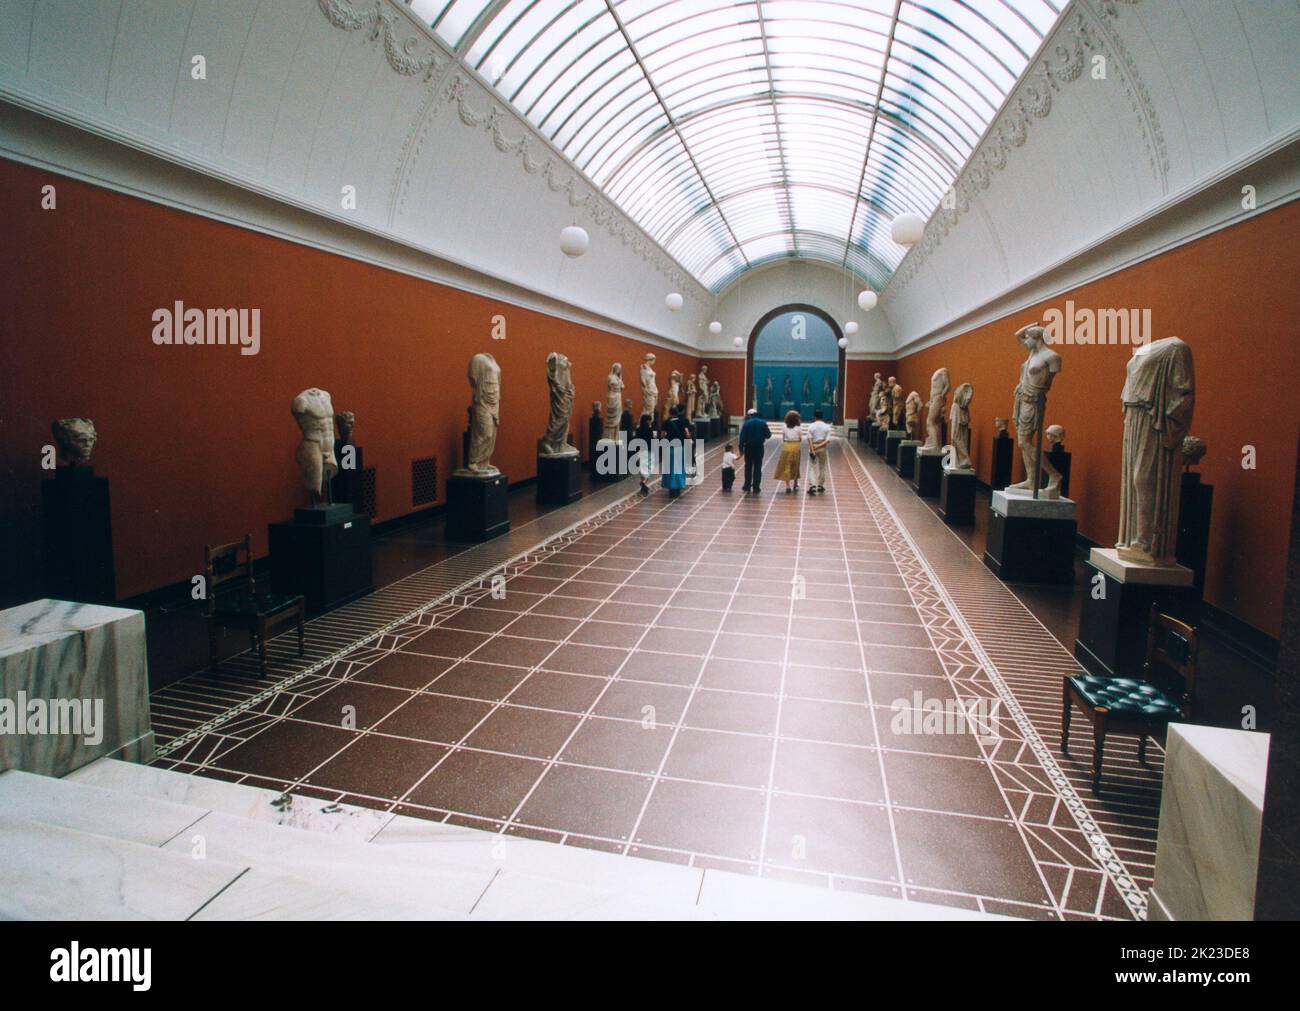 NY CARLSBERG GLYPTOTEK in Copenhagen Denmark artmuseum with ancient sculptures and art represents the private art collectionof Carl Jacobsen Hall with Roman sculptures Stock Photo